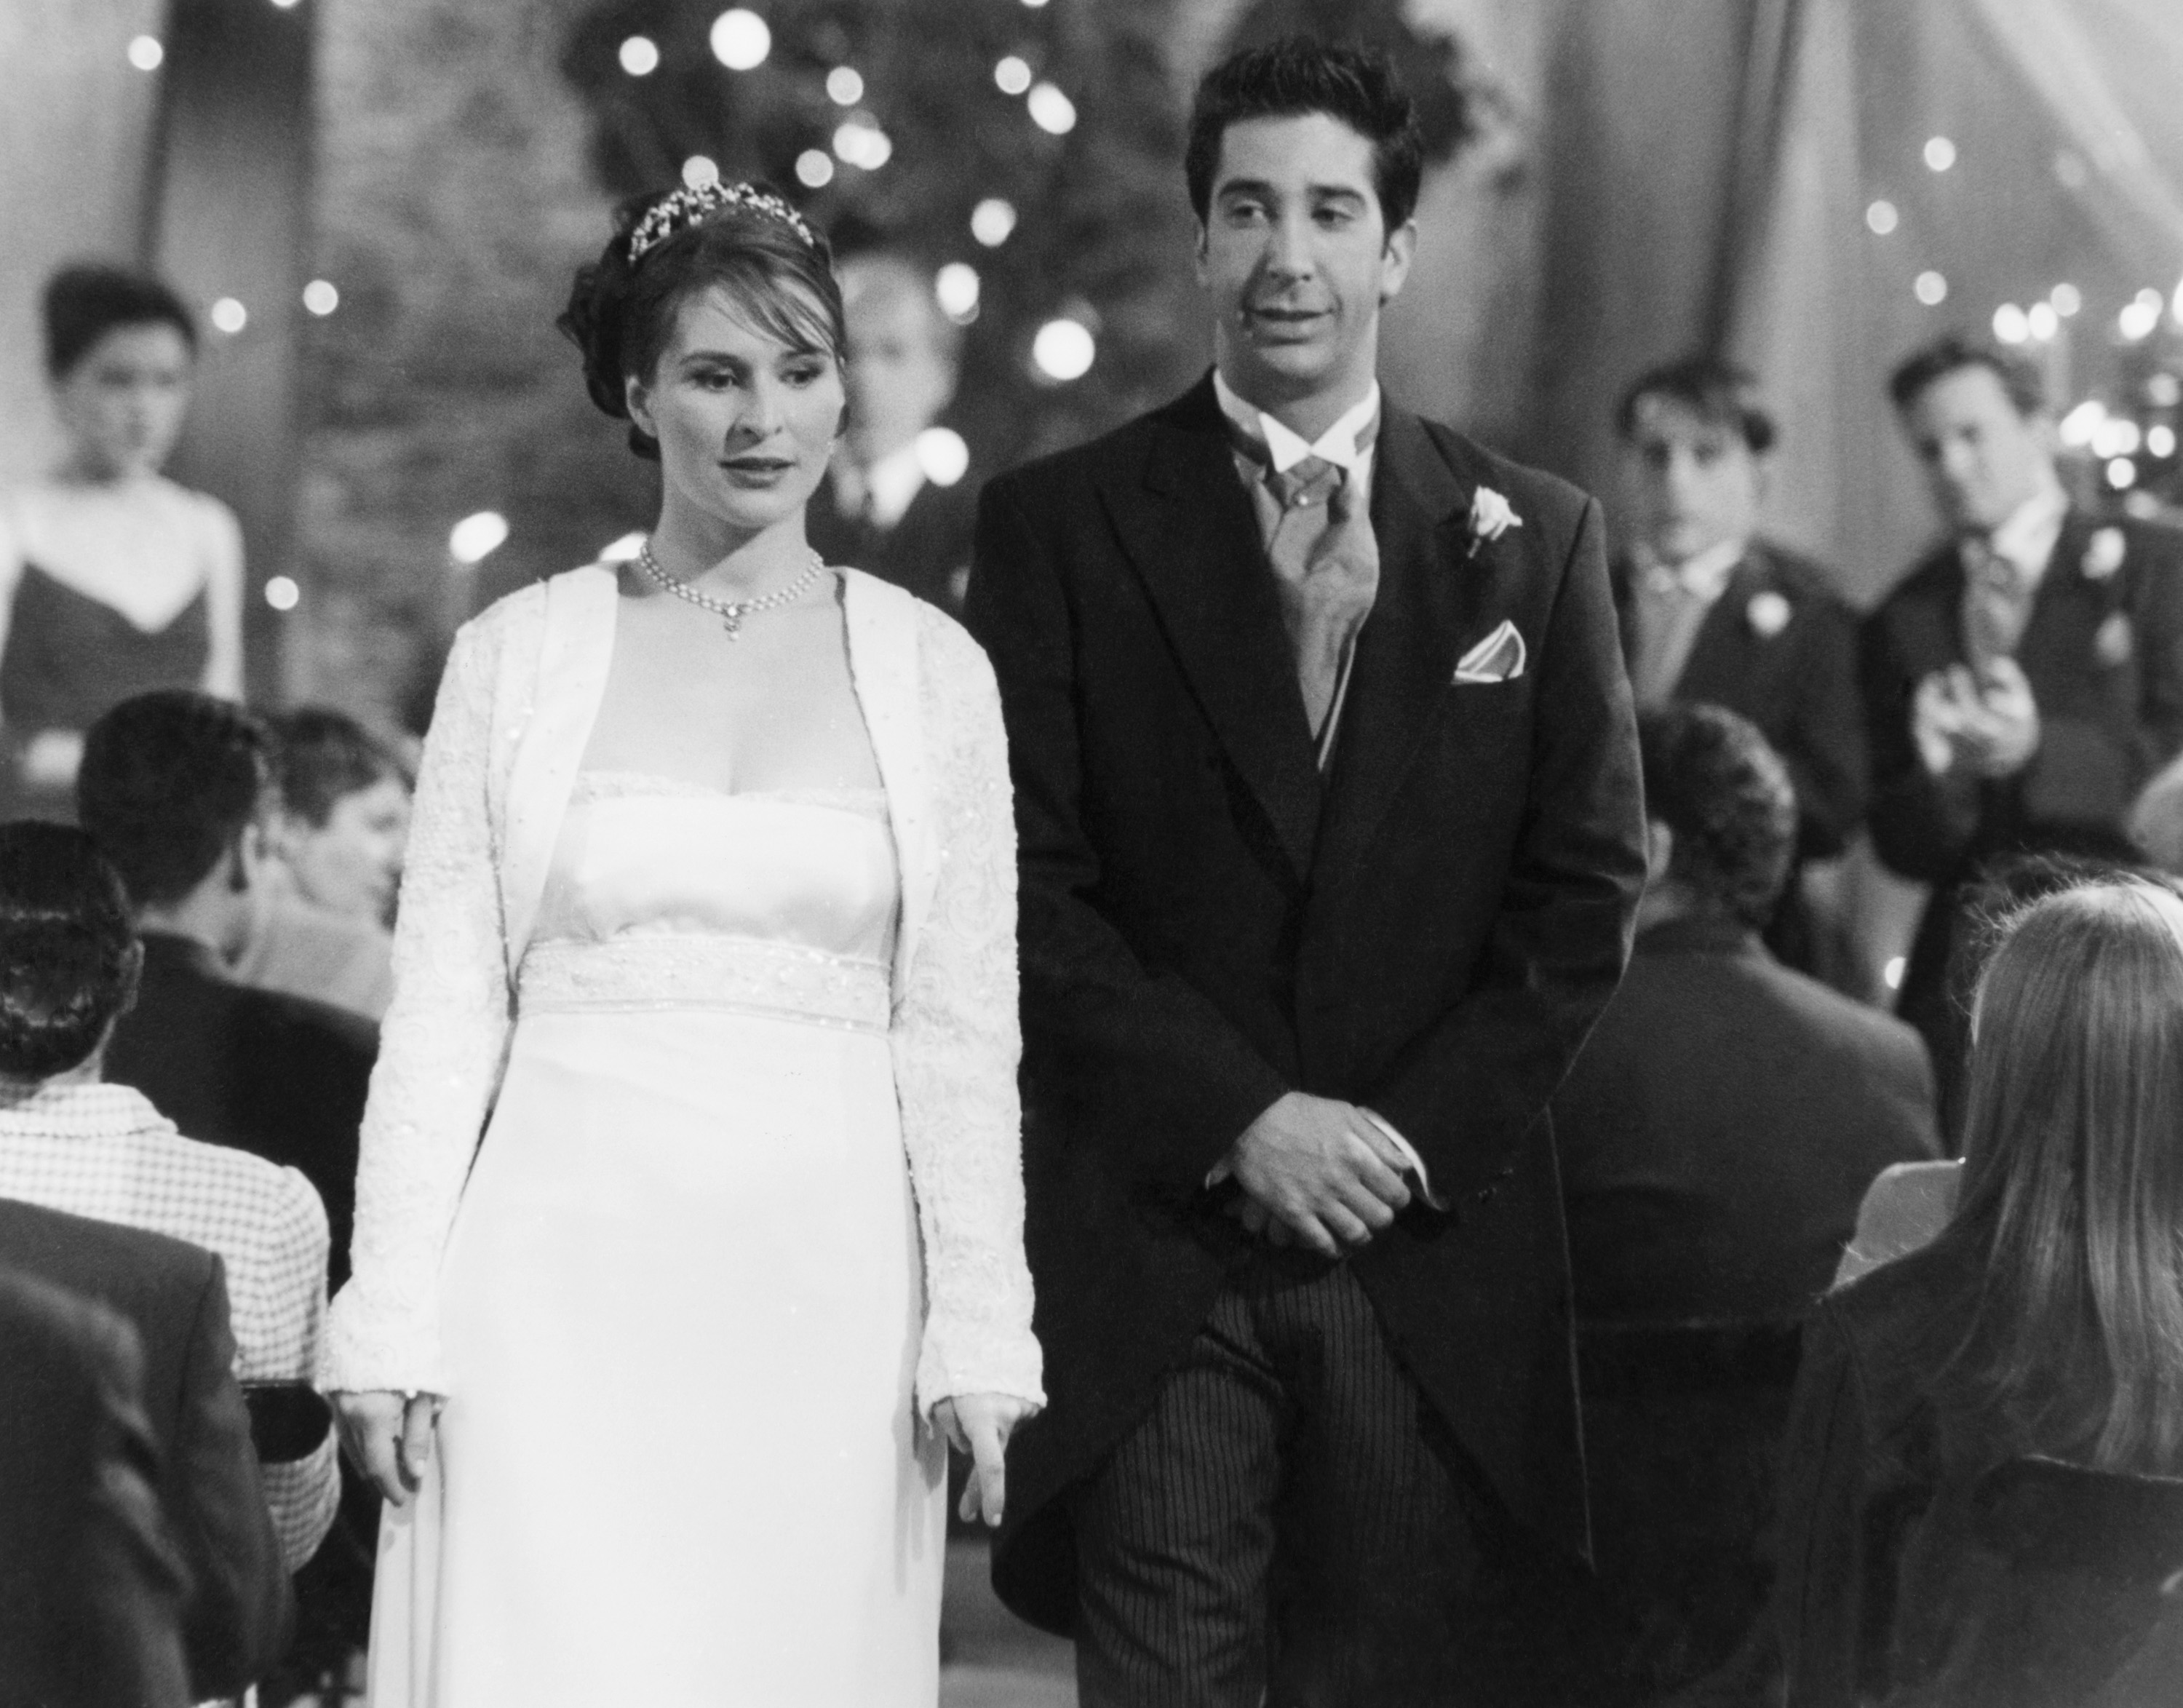 Emily Waltham and Ross Geller get married in 'Friends'